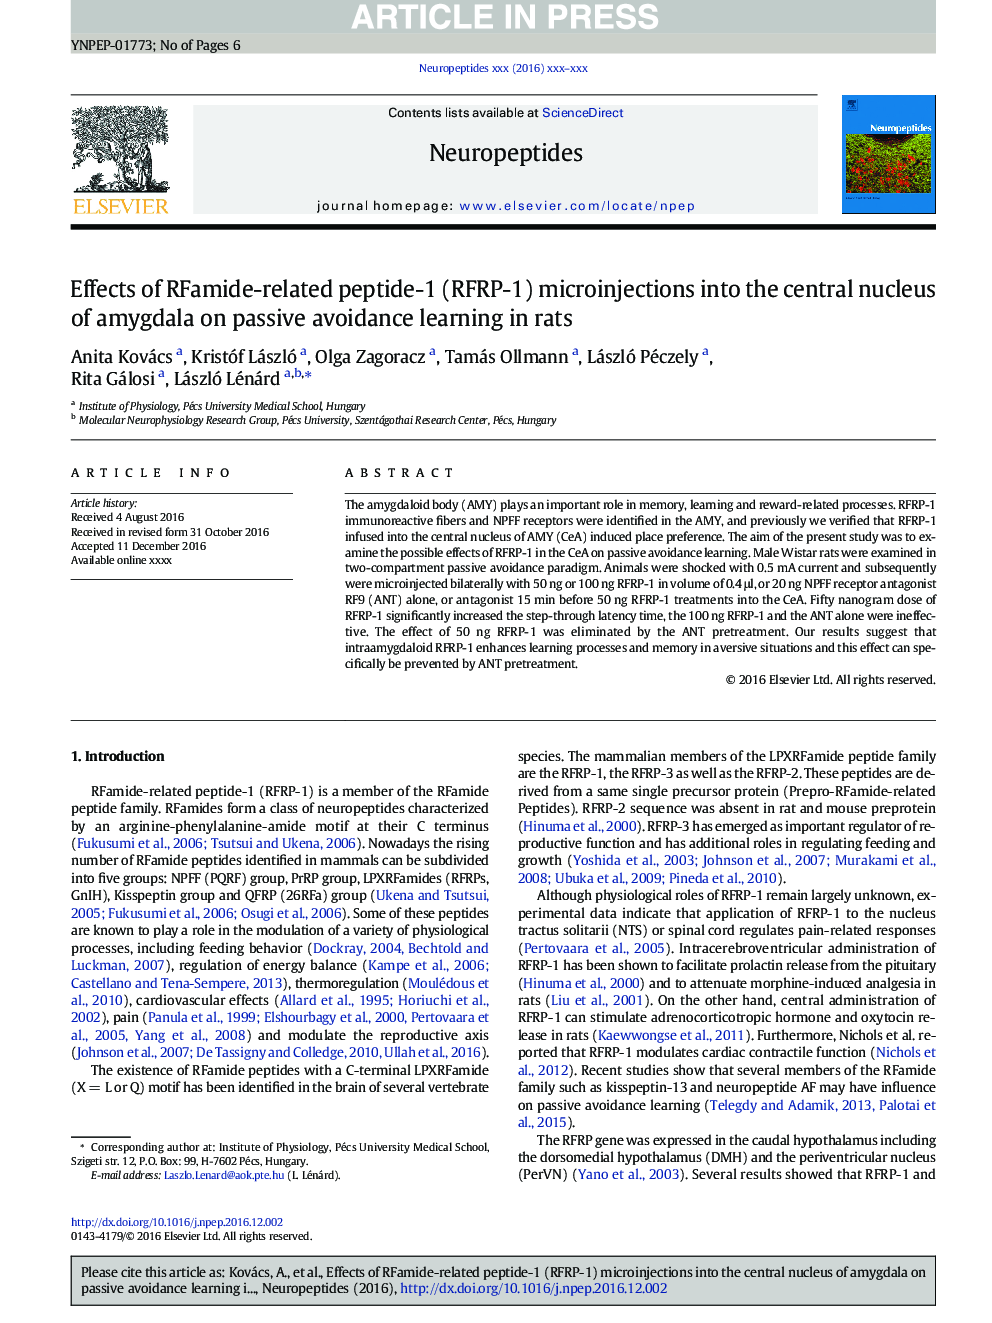 Effects of RFamide-related peptide-1 (RFRP-1) microinjections into the central nucleus of amygdala on passive avoidance learning in rats